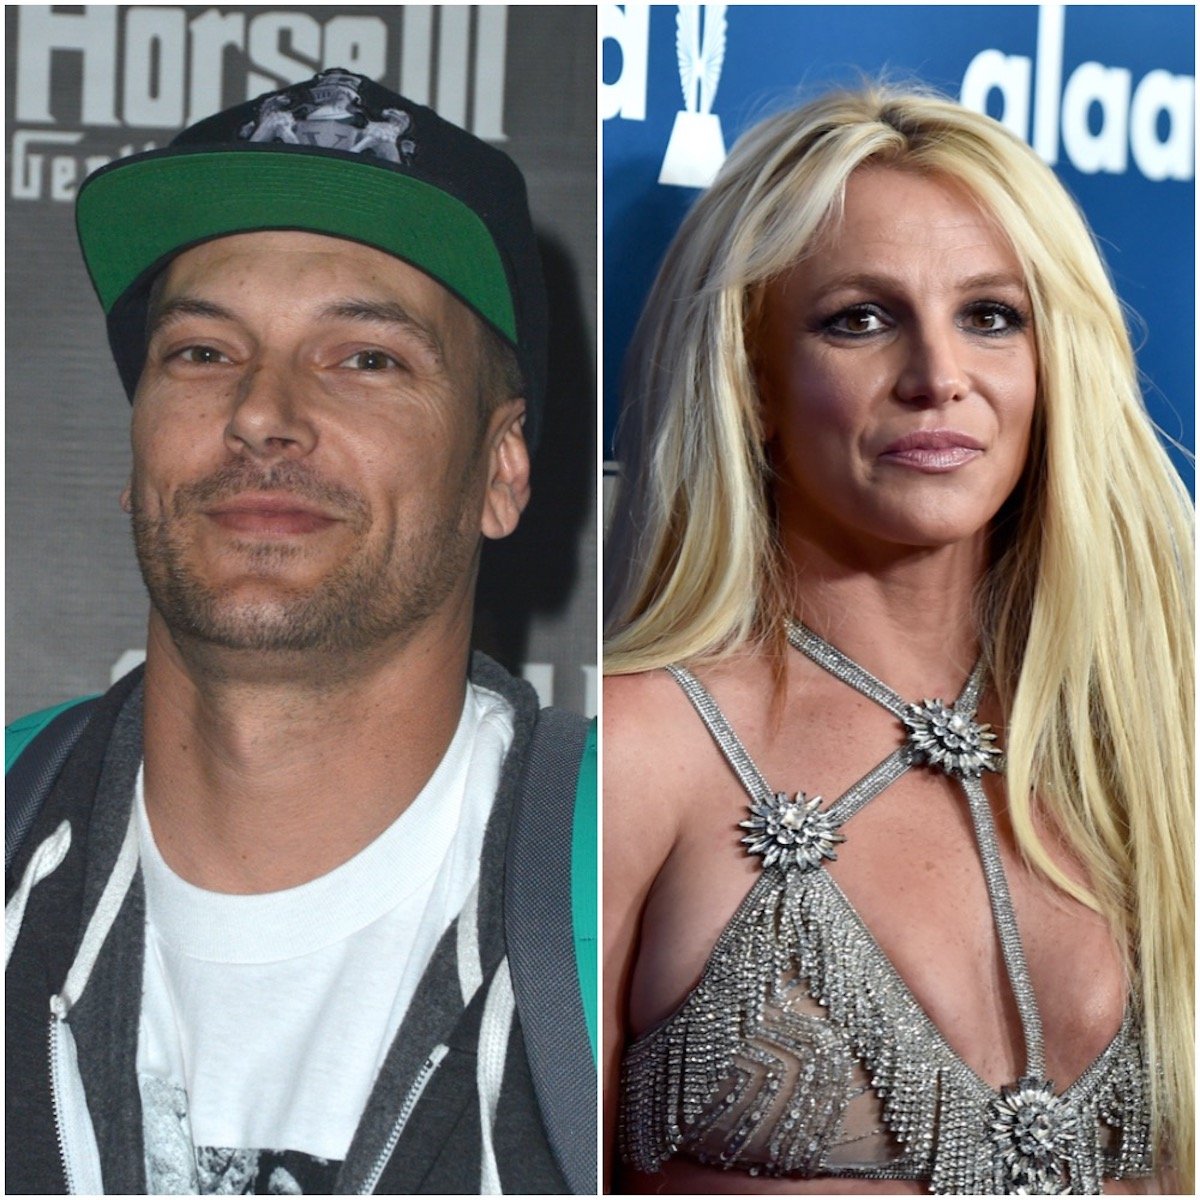 Kevin Federline and Britney Spears posing for photos at media events